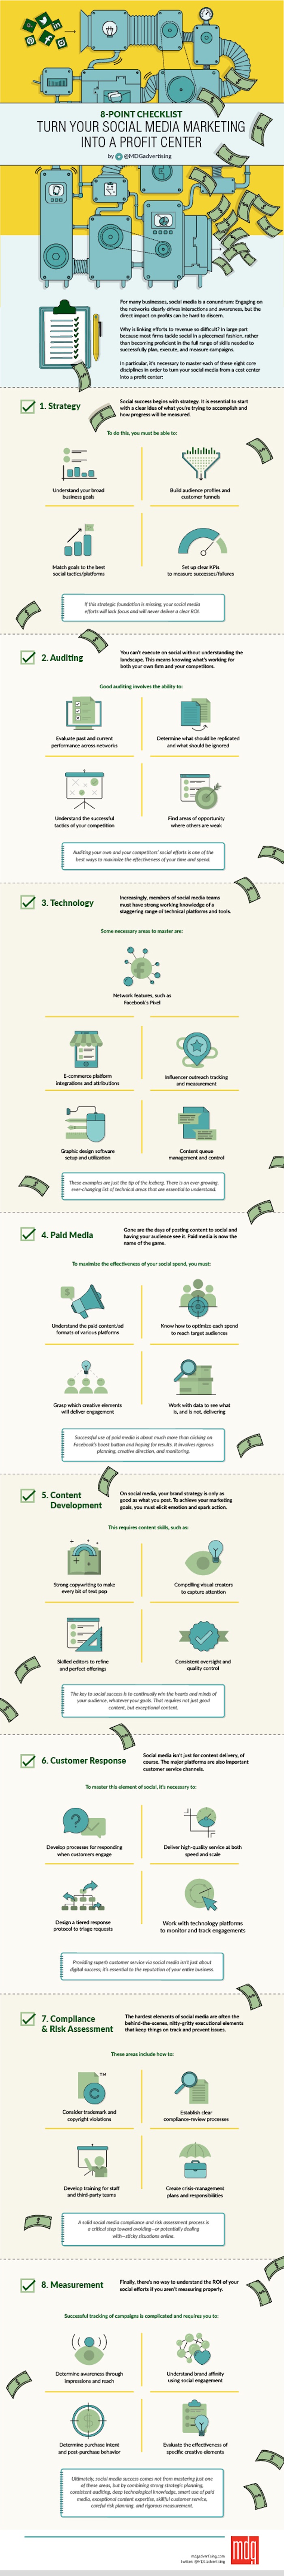 An 8-point checklist for turning your social media marketing into a profit center infographic